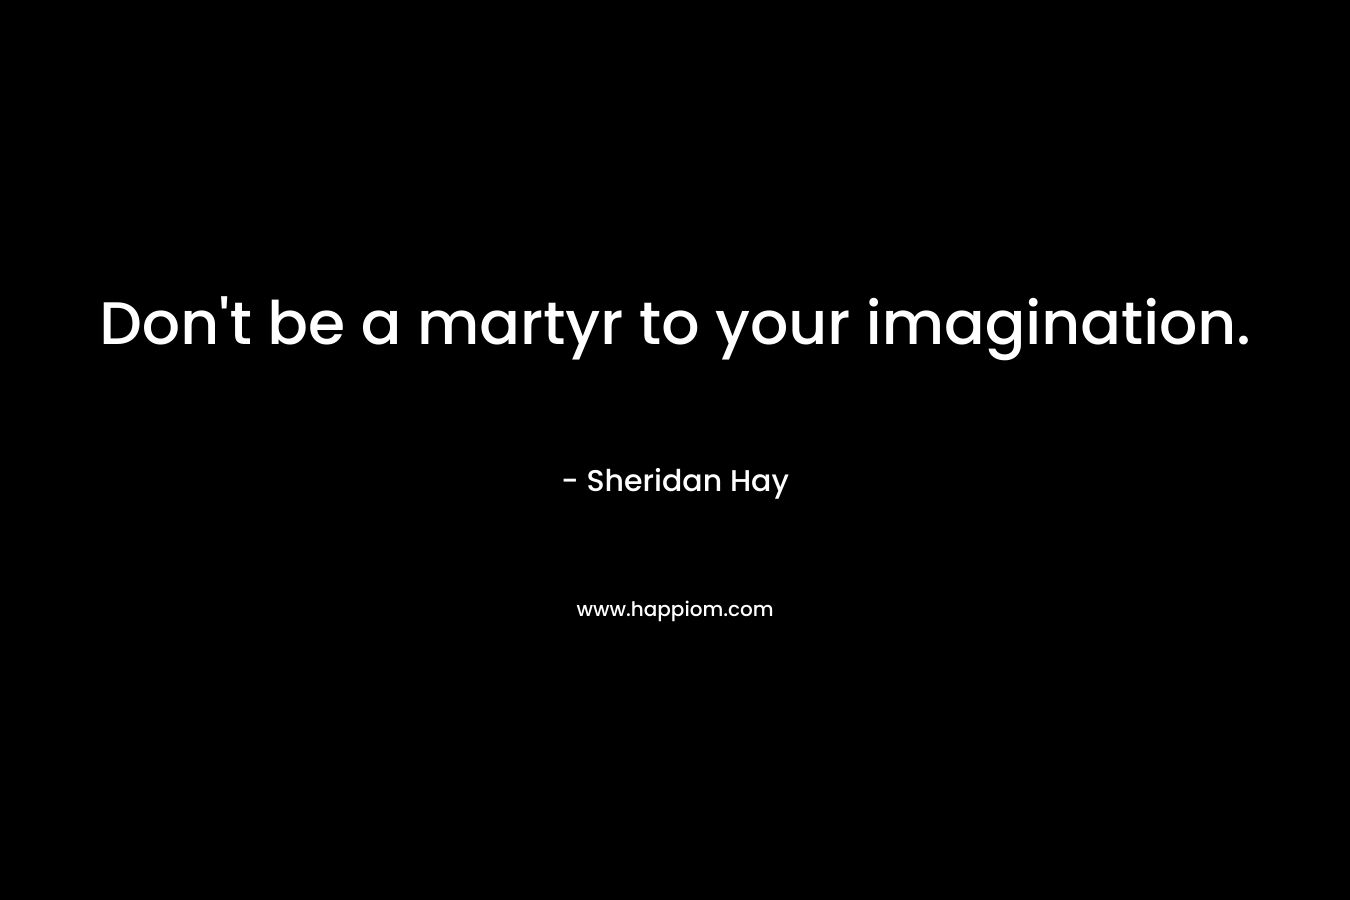 Don't be a martyr to your imagination.